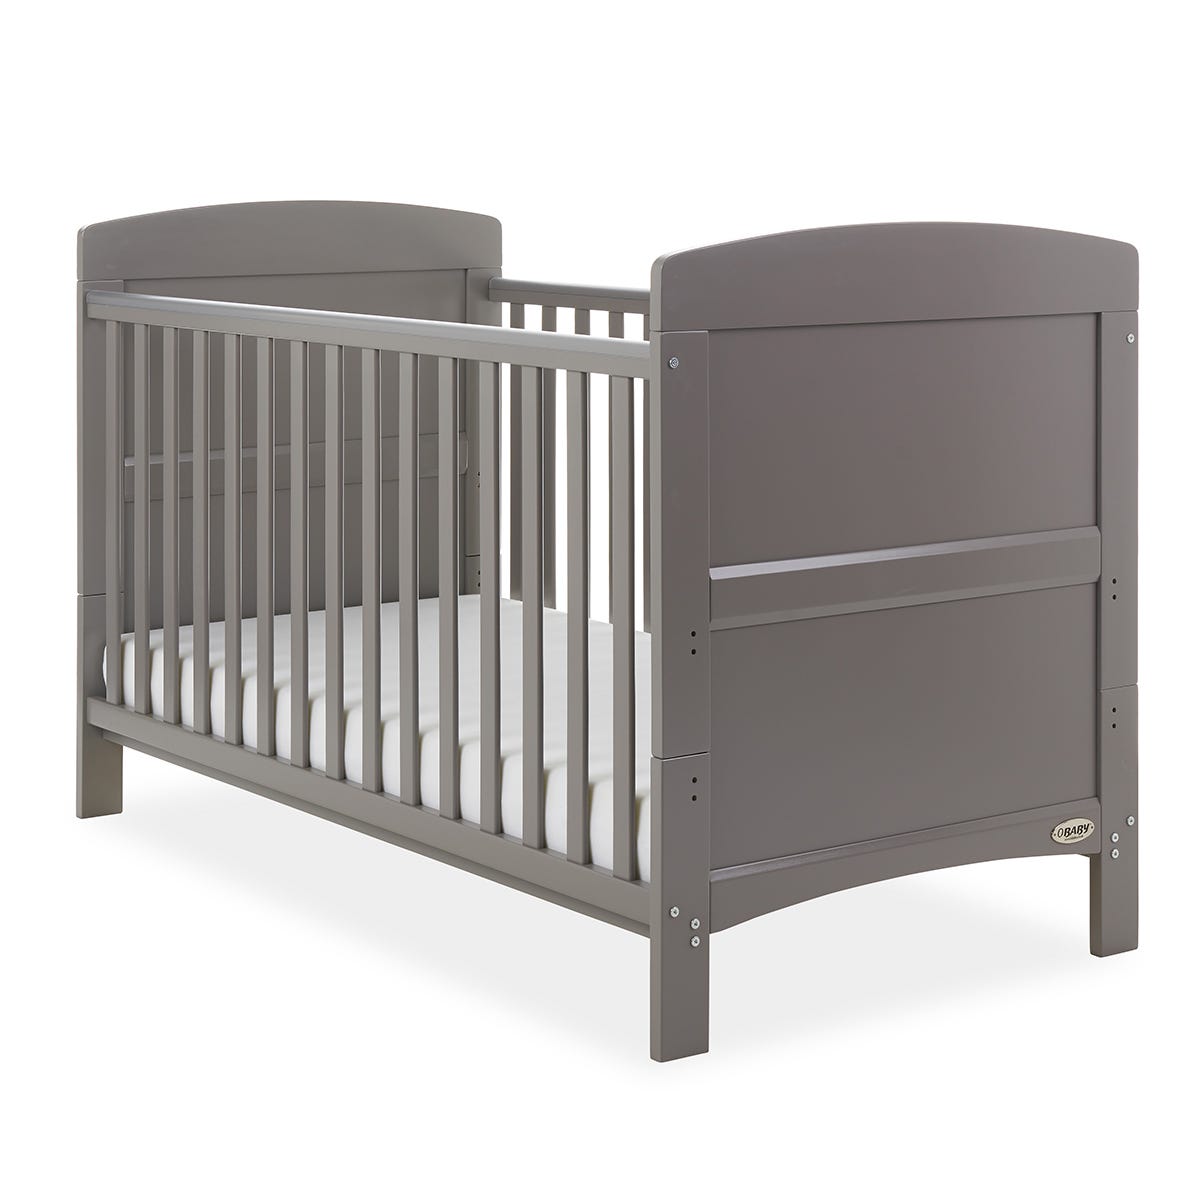 Obaby Grace Cot Bed - Taupe Grey